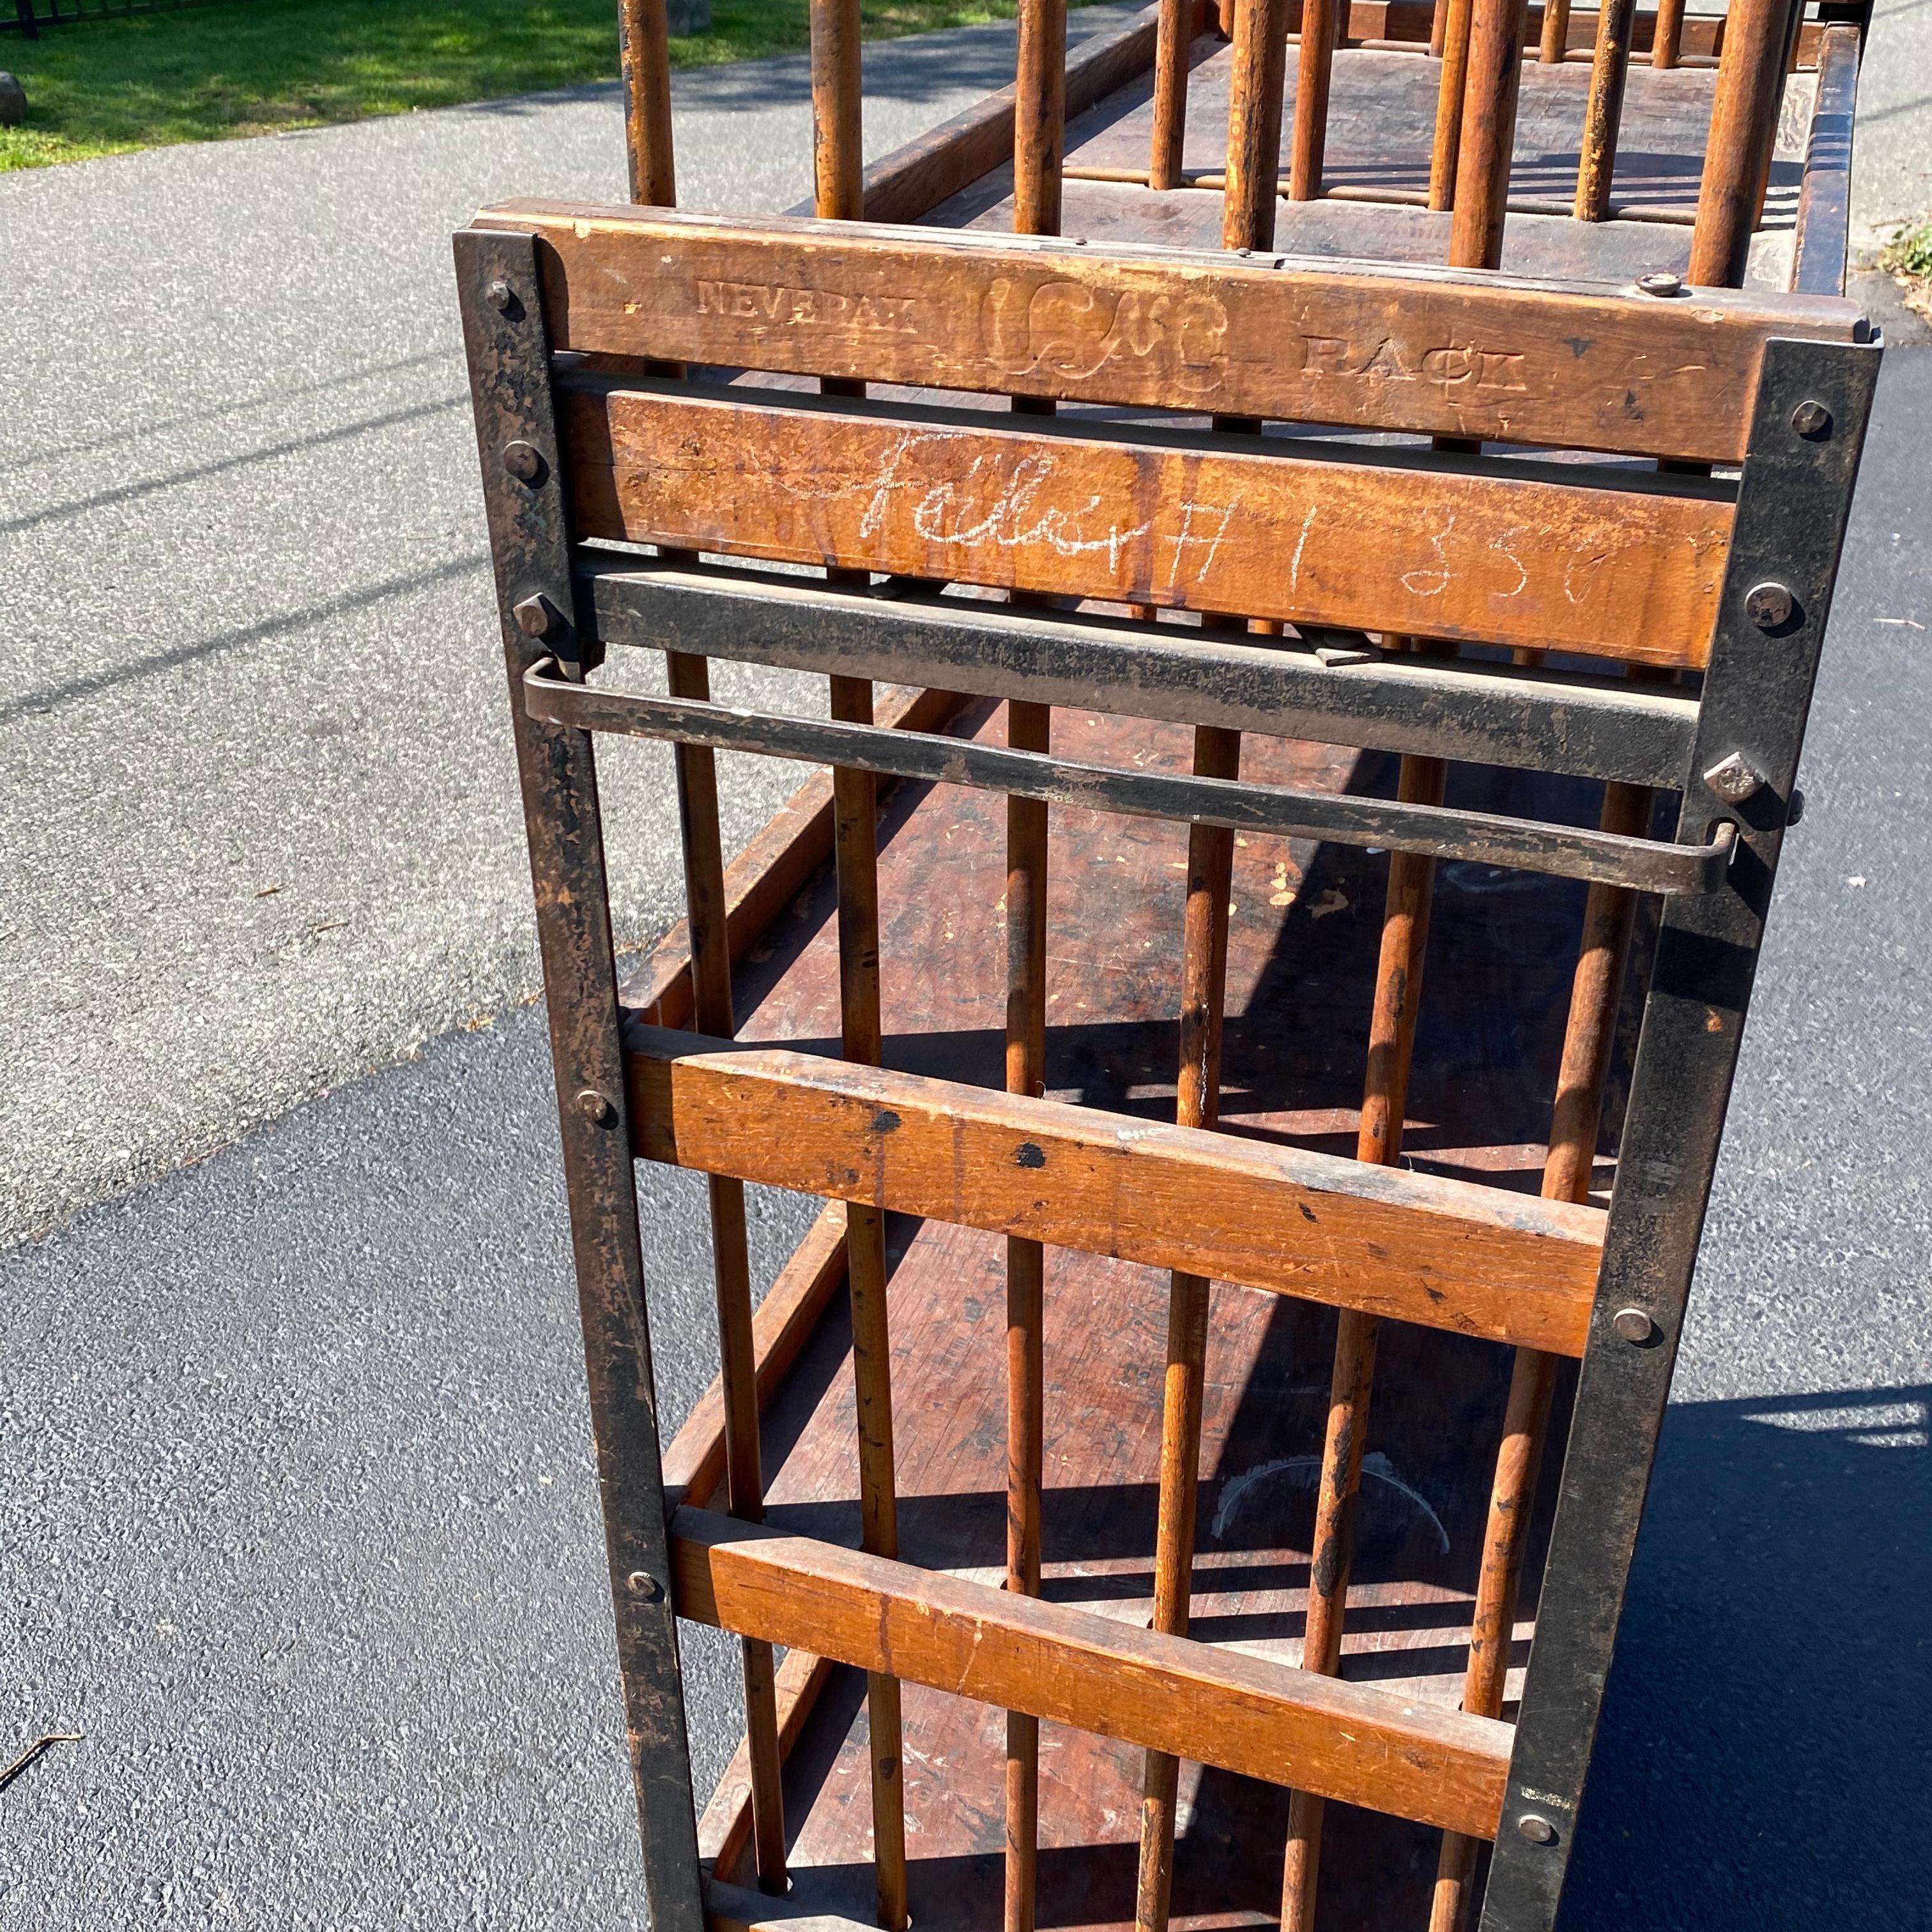 Hand-Crafted American 1930s Wooden Shelf, Cart or Bread Rack on Industrial Iron Wheels